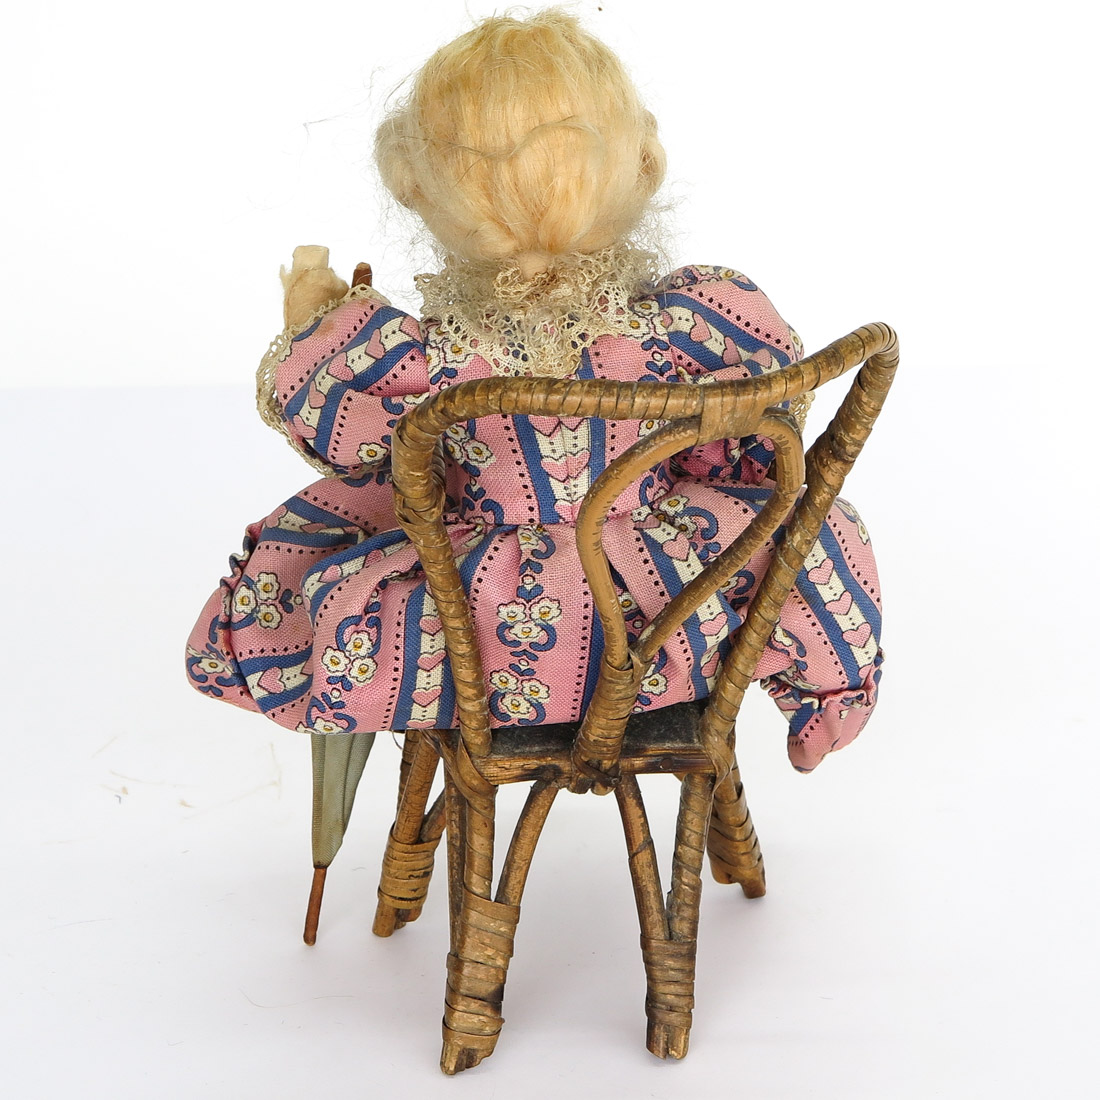 Vintage Cloth Doll in Chair - Image 2 of 2